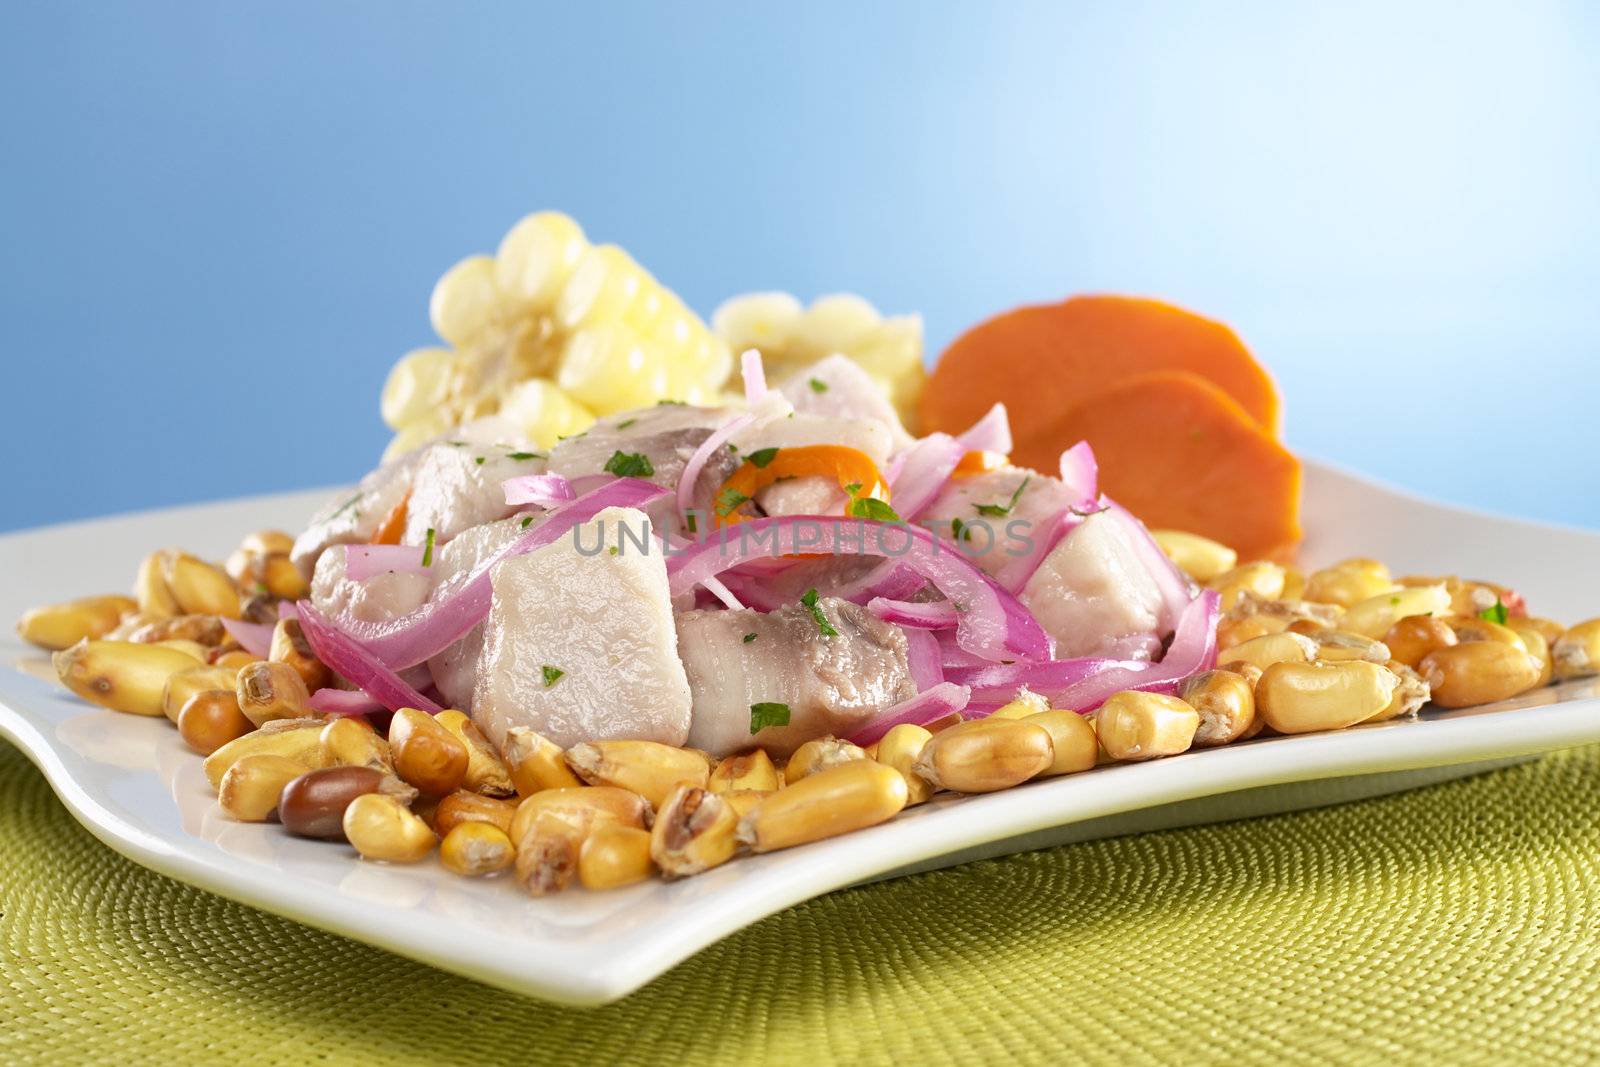 Peruvian-style ceviche made out of raw mahi-mahi fish (Spanish: perico), red onions and aji (Peruvian hot pepper) and served with roasted corn (cancha) and cooked corn cob as well as cooked sweet potato (Selective Focus, Focus on the front of the fish)